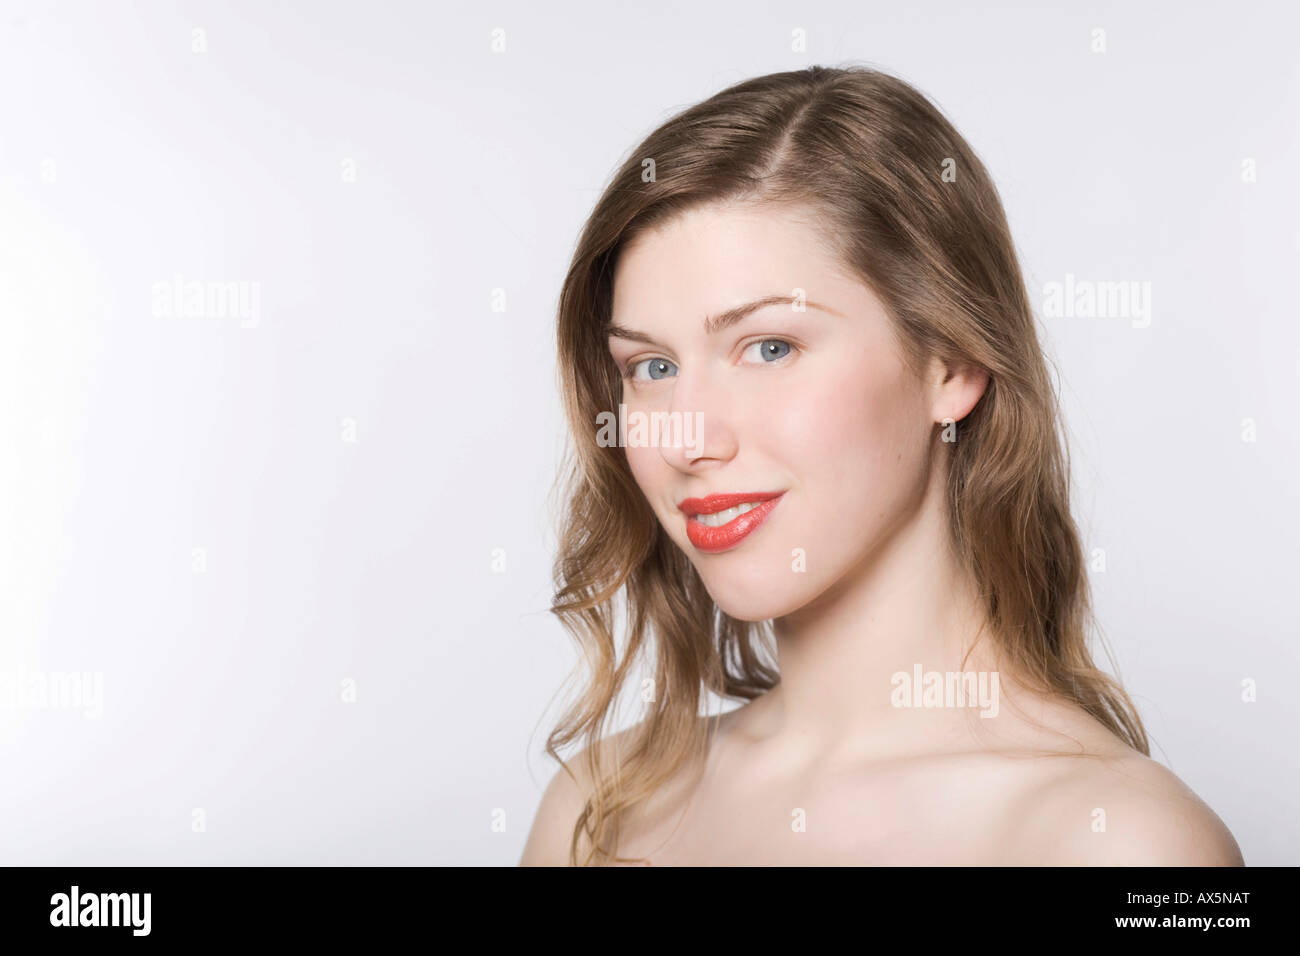 Portrait of a young woman wearing red lipstick Stock Photo